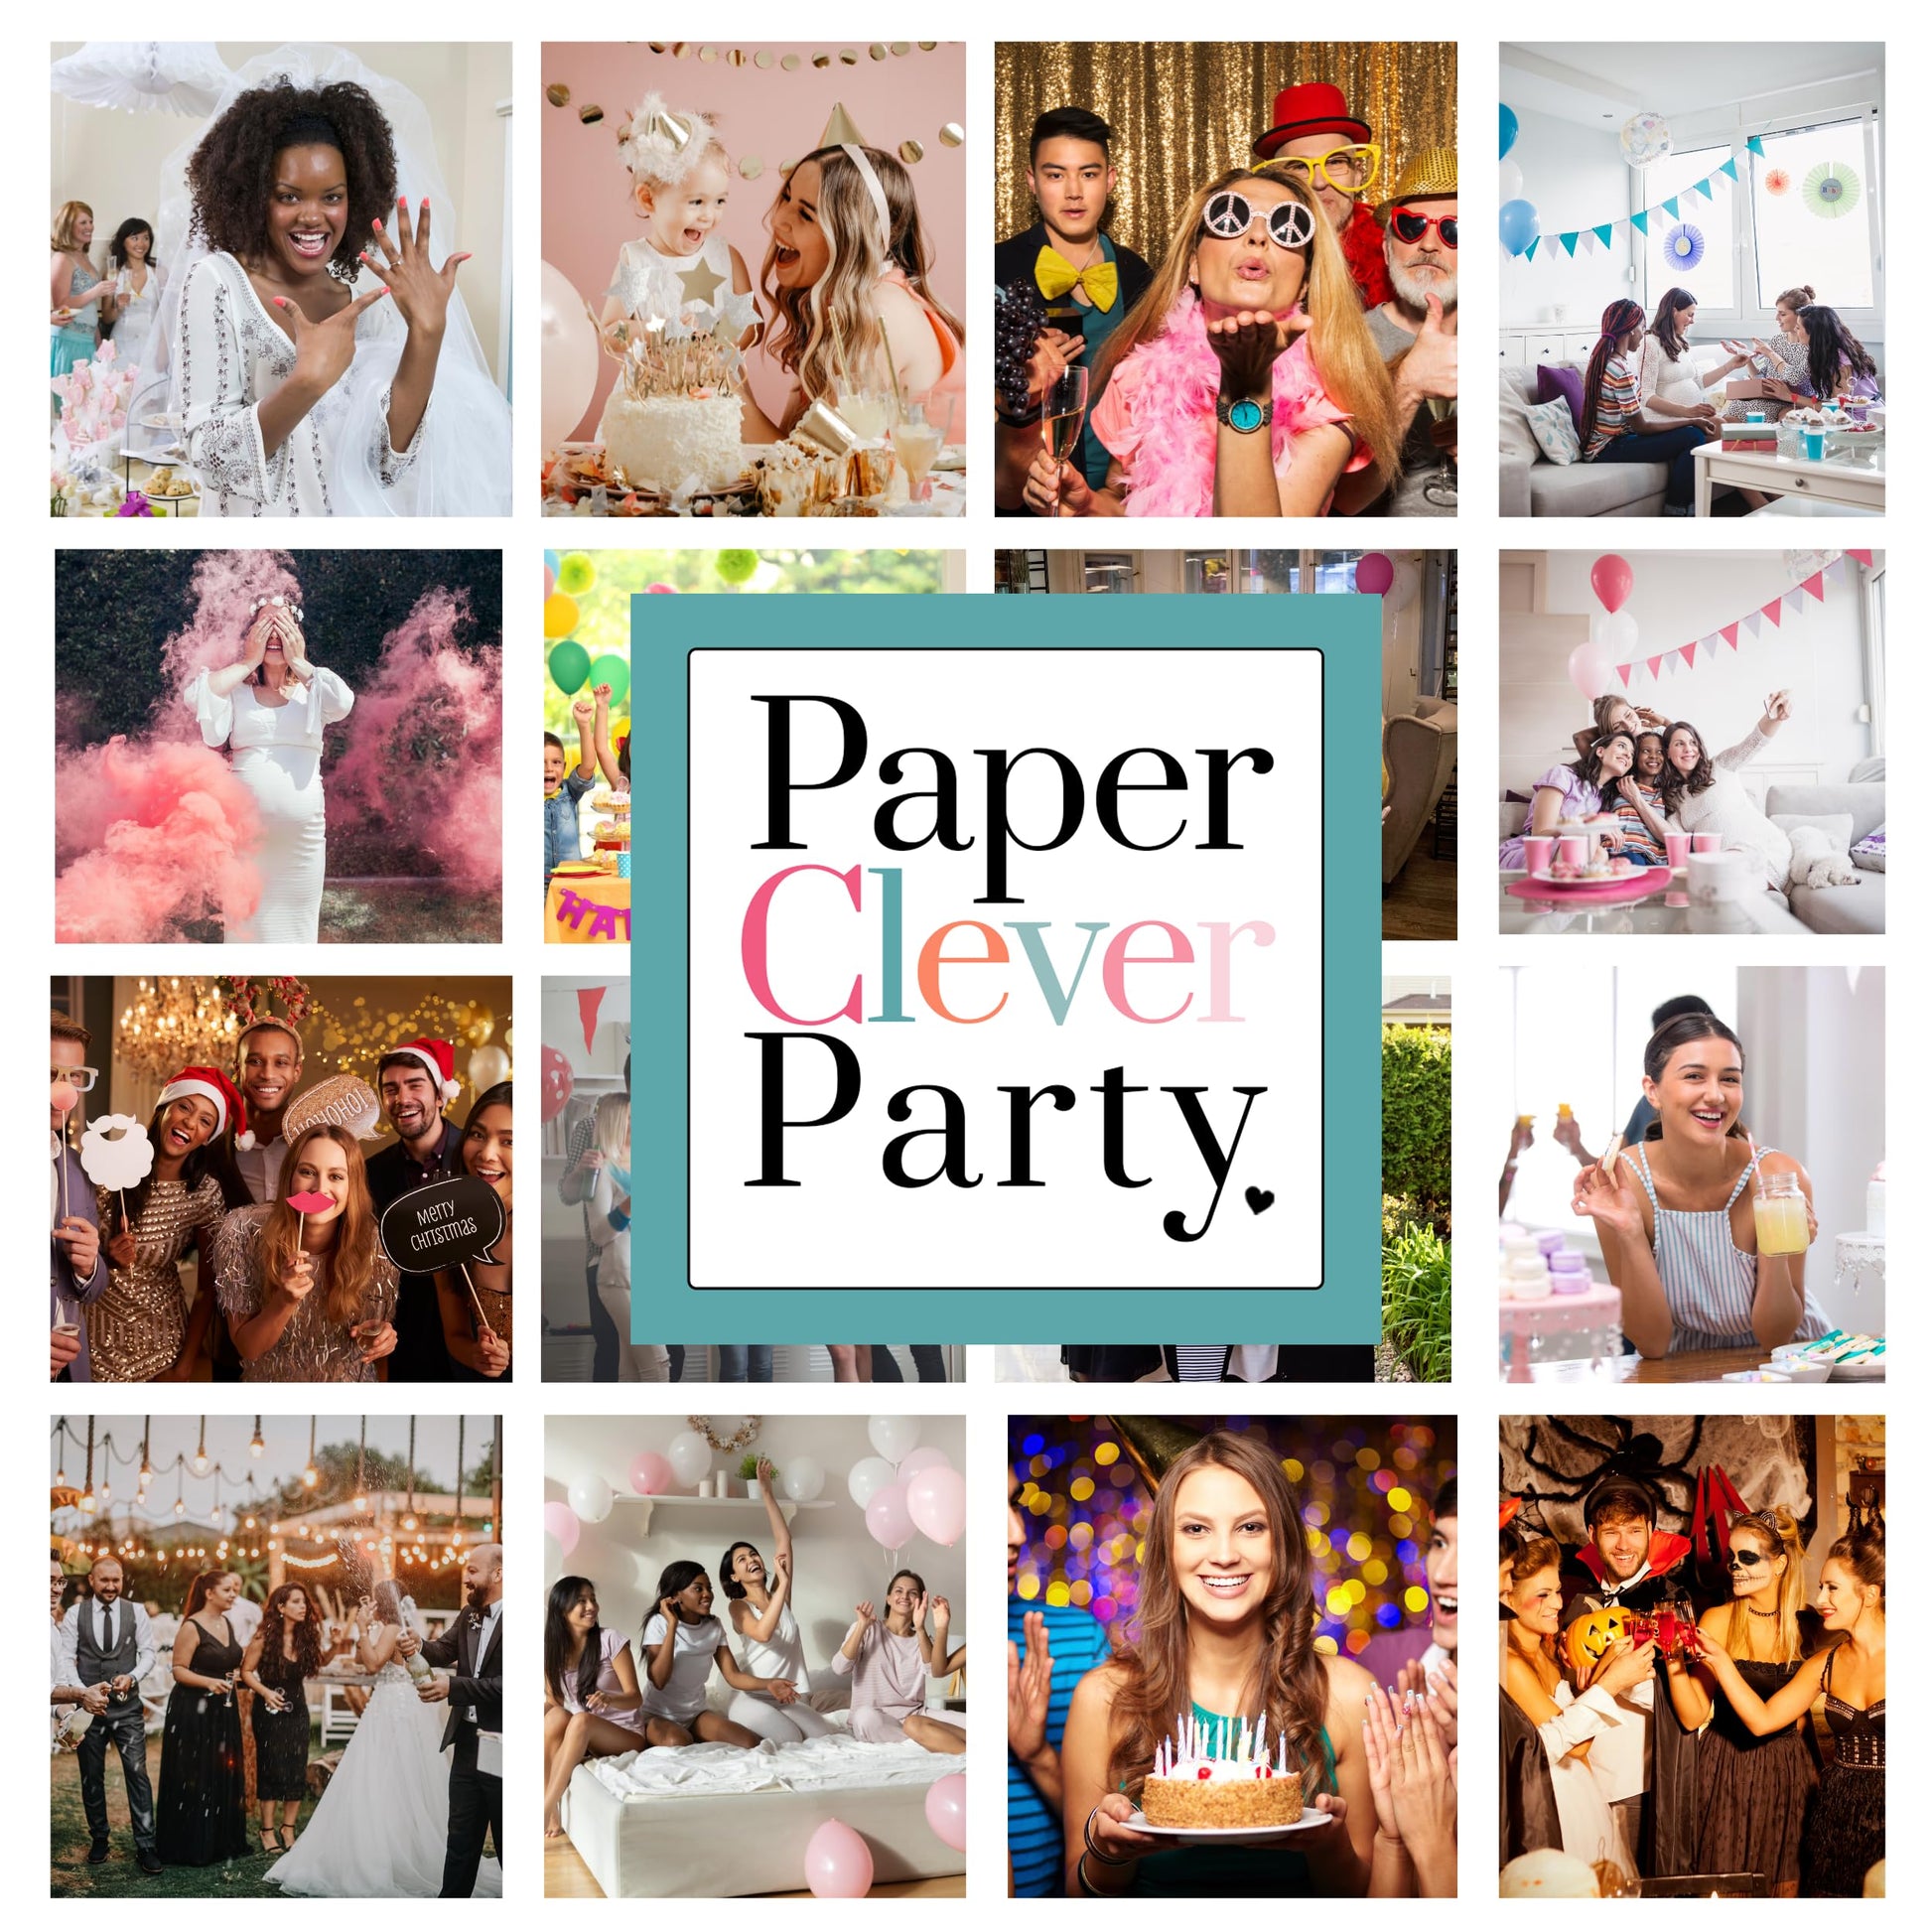 Occasions, Wedding, Showers, Graduation, Retirement, BirthdayPaper Clever Party